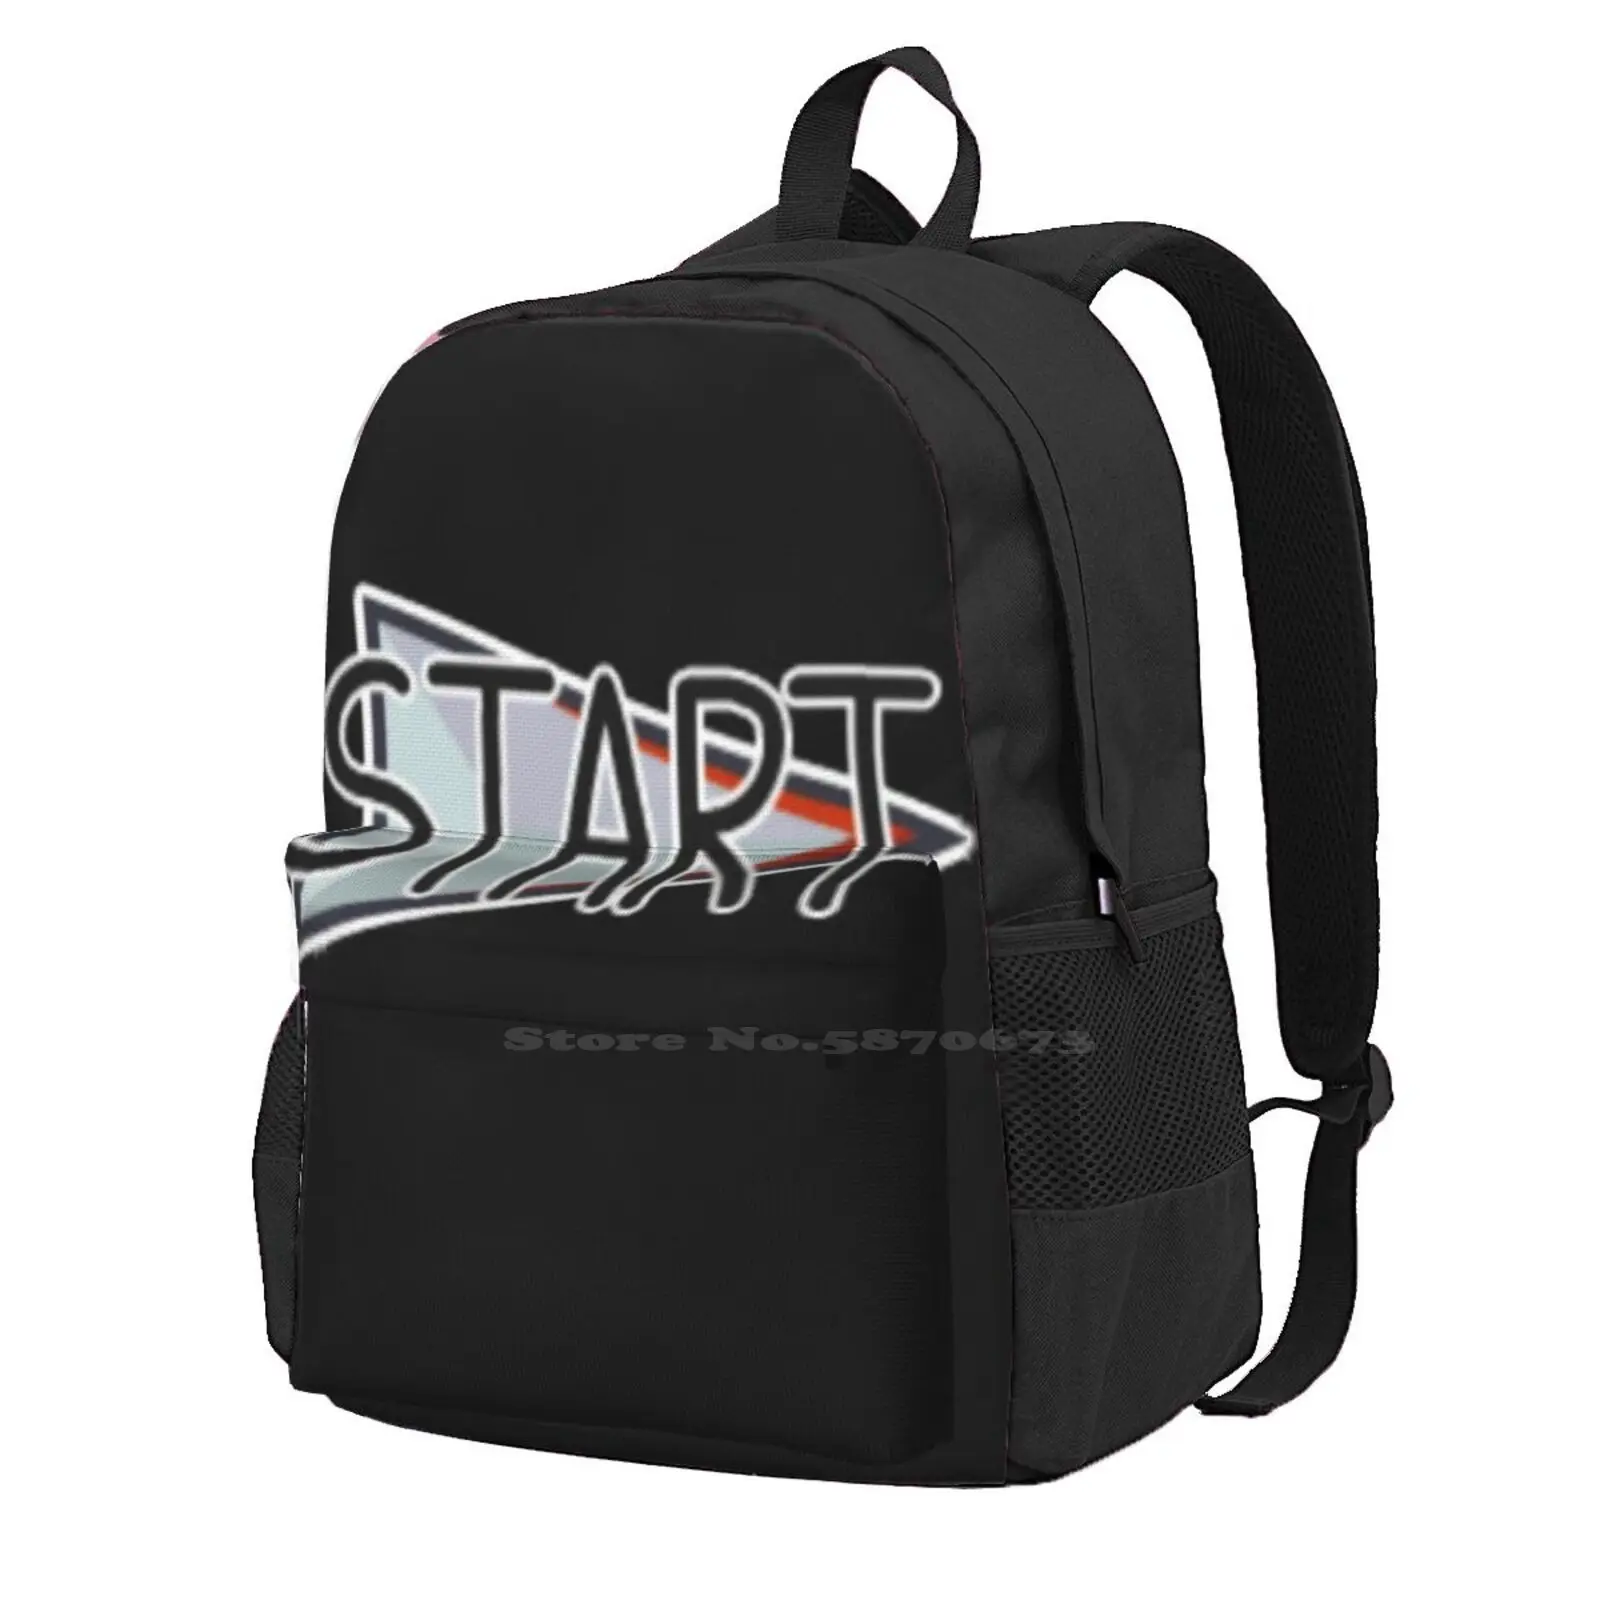 

Start Backpack For Student School Laptop Travel Bag Steam Imposter Gaming Pc Crewmate Gameplay App Dead Video Game Computer